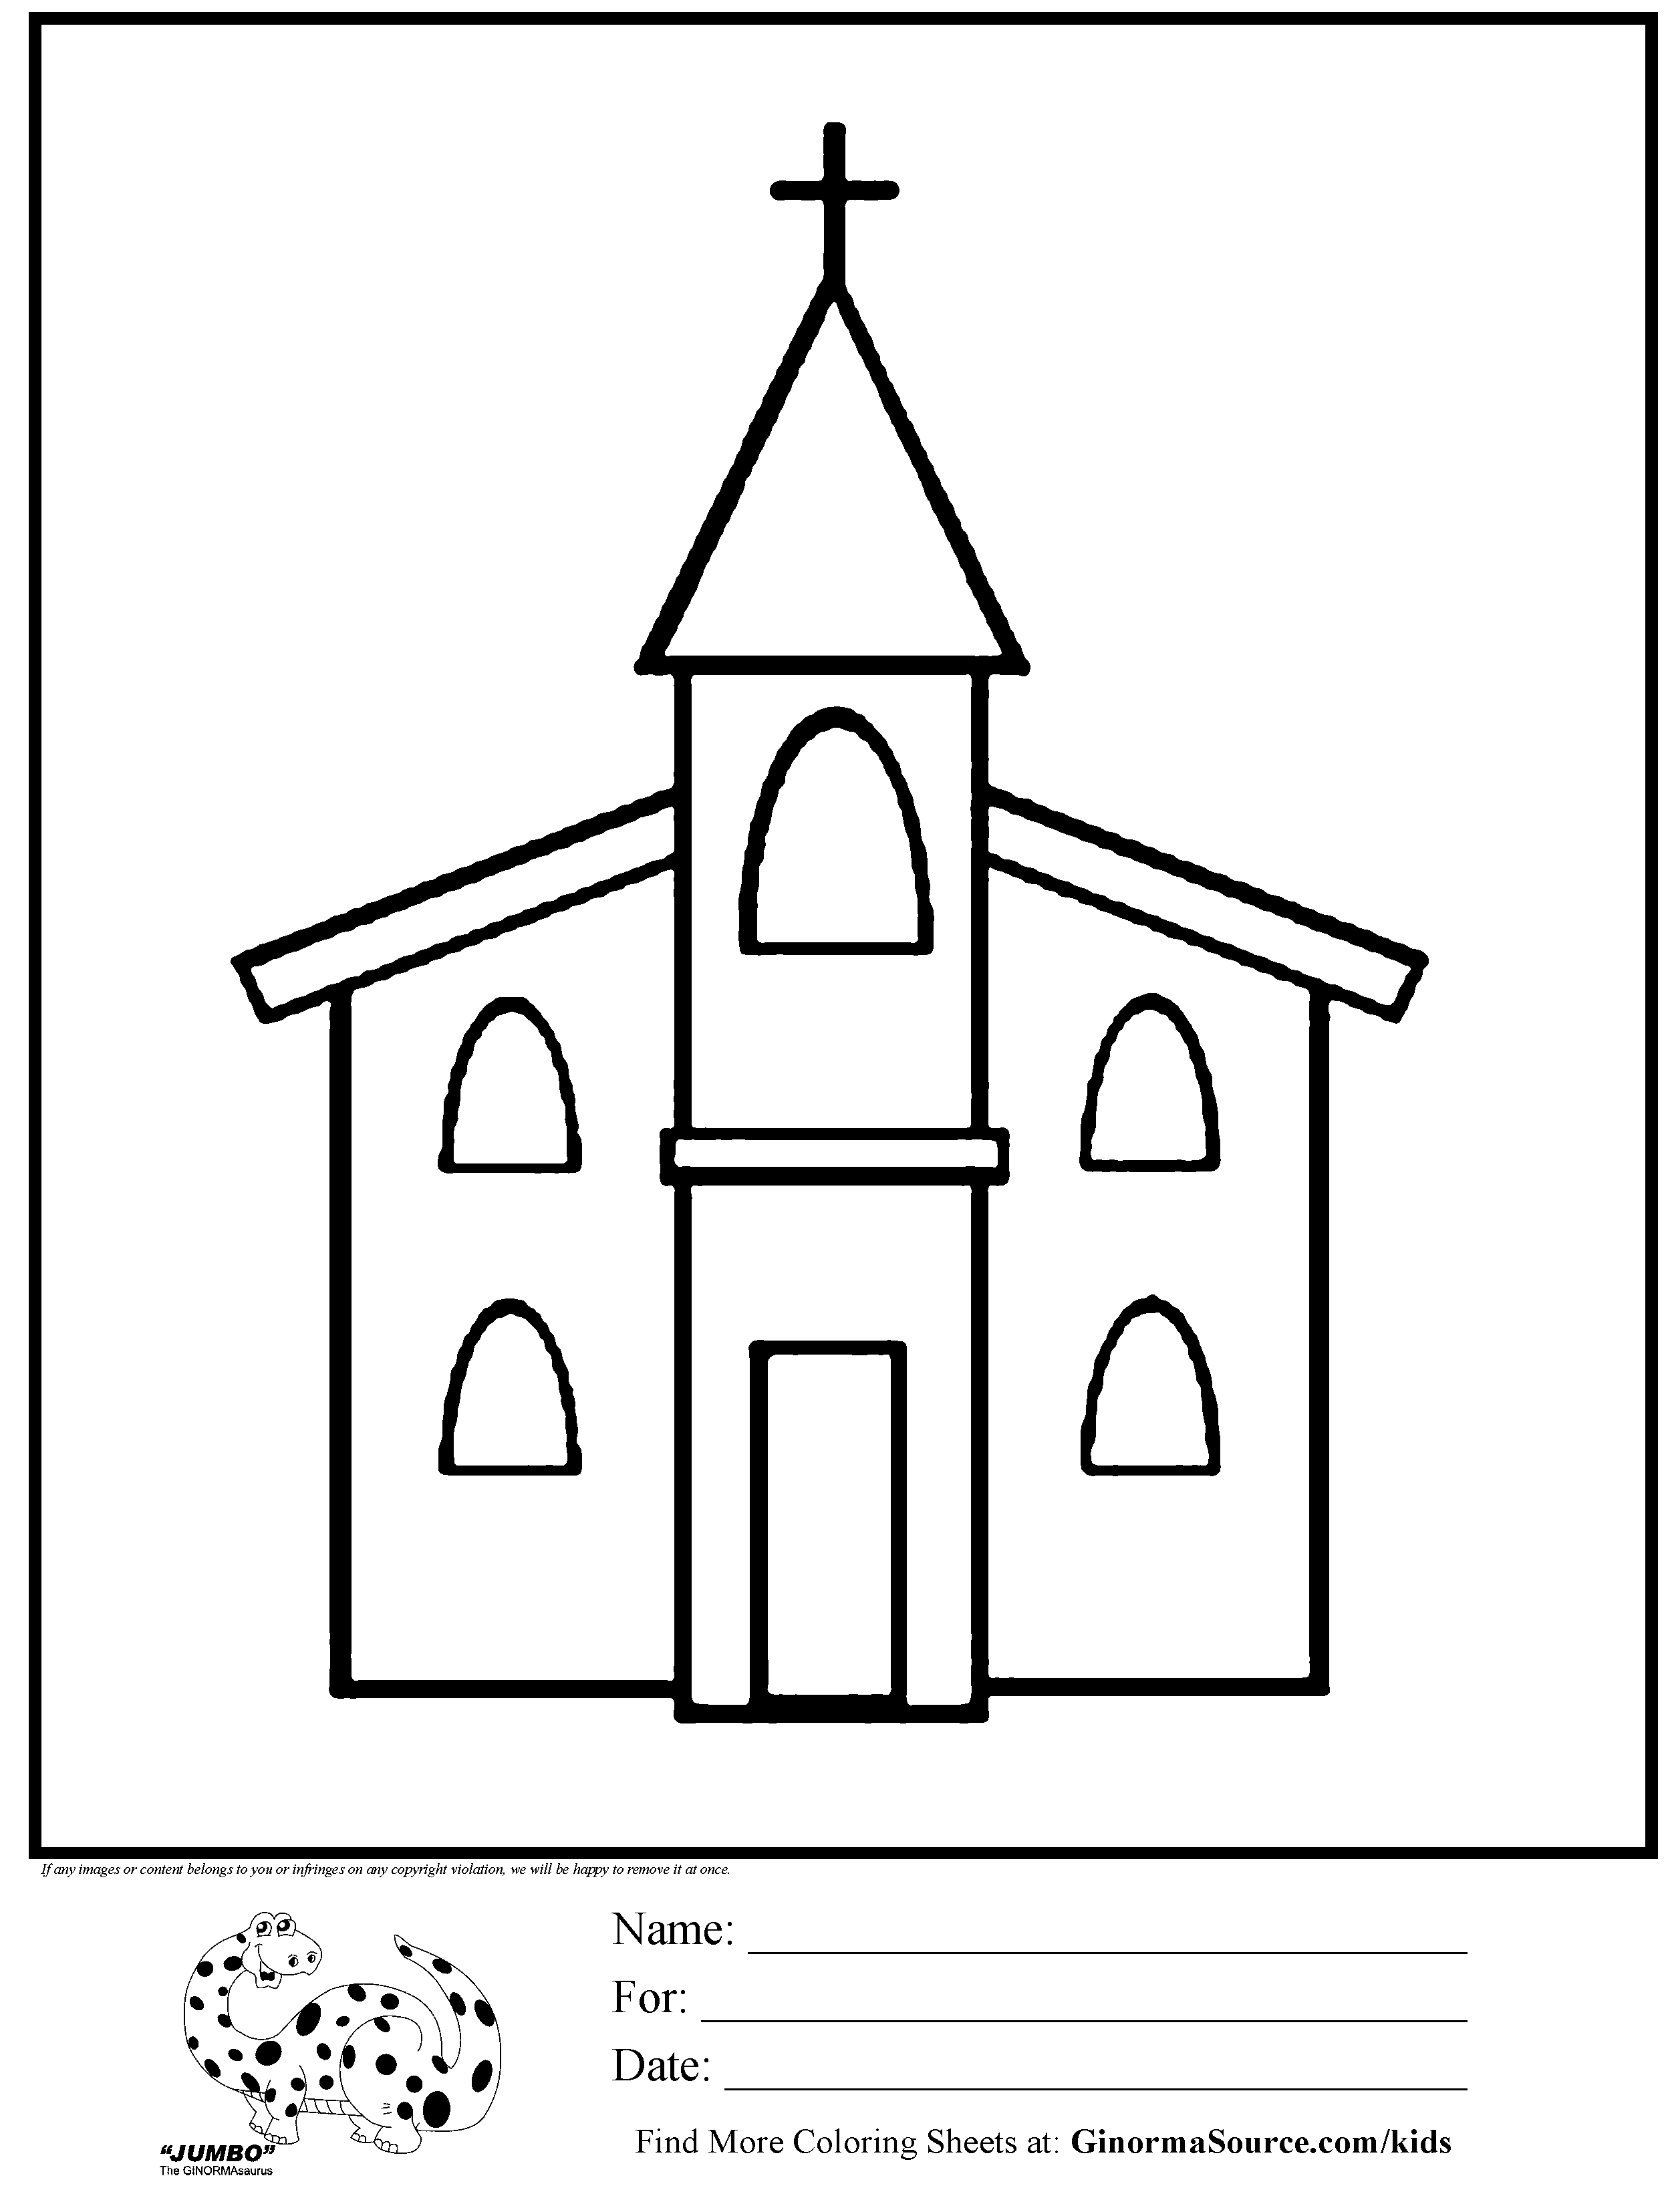 here-you-will-find-printable-coloring-pages-for-kids-with-an